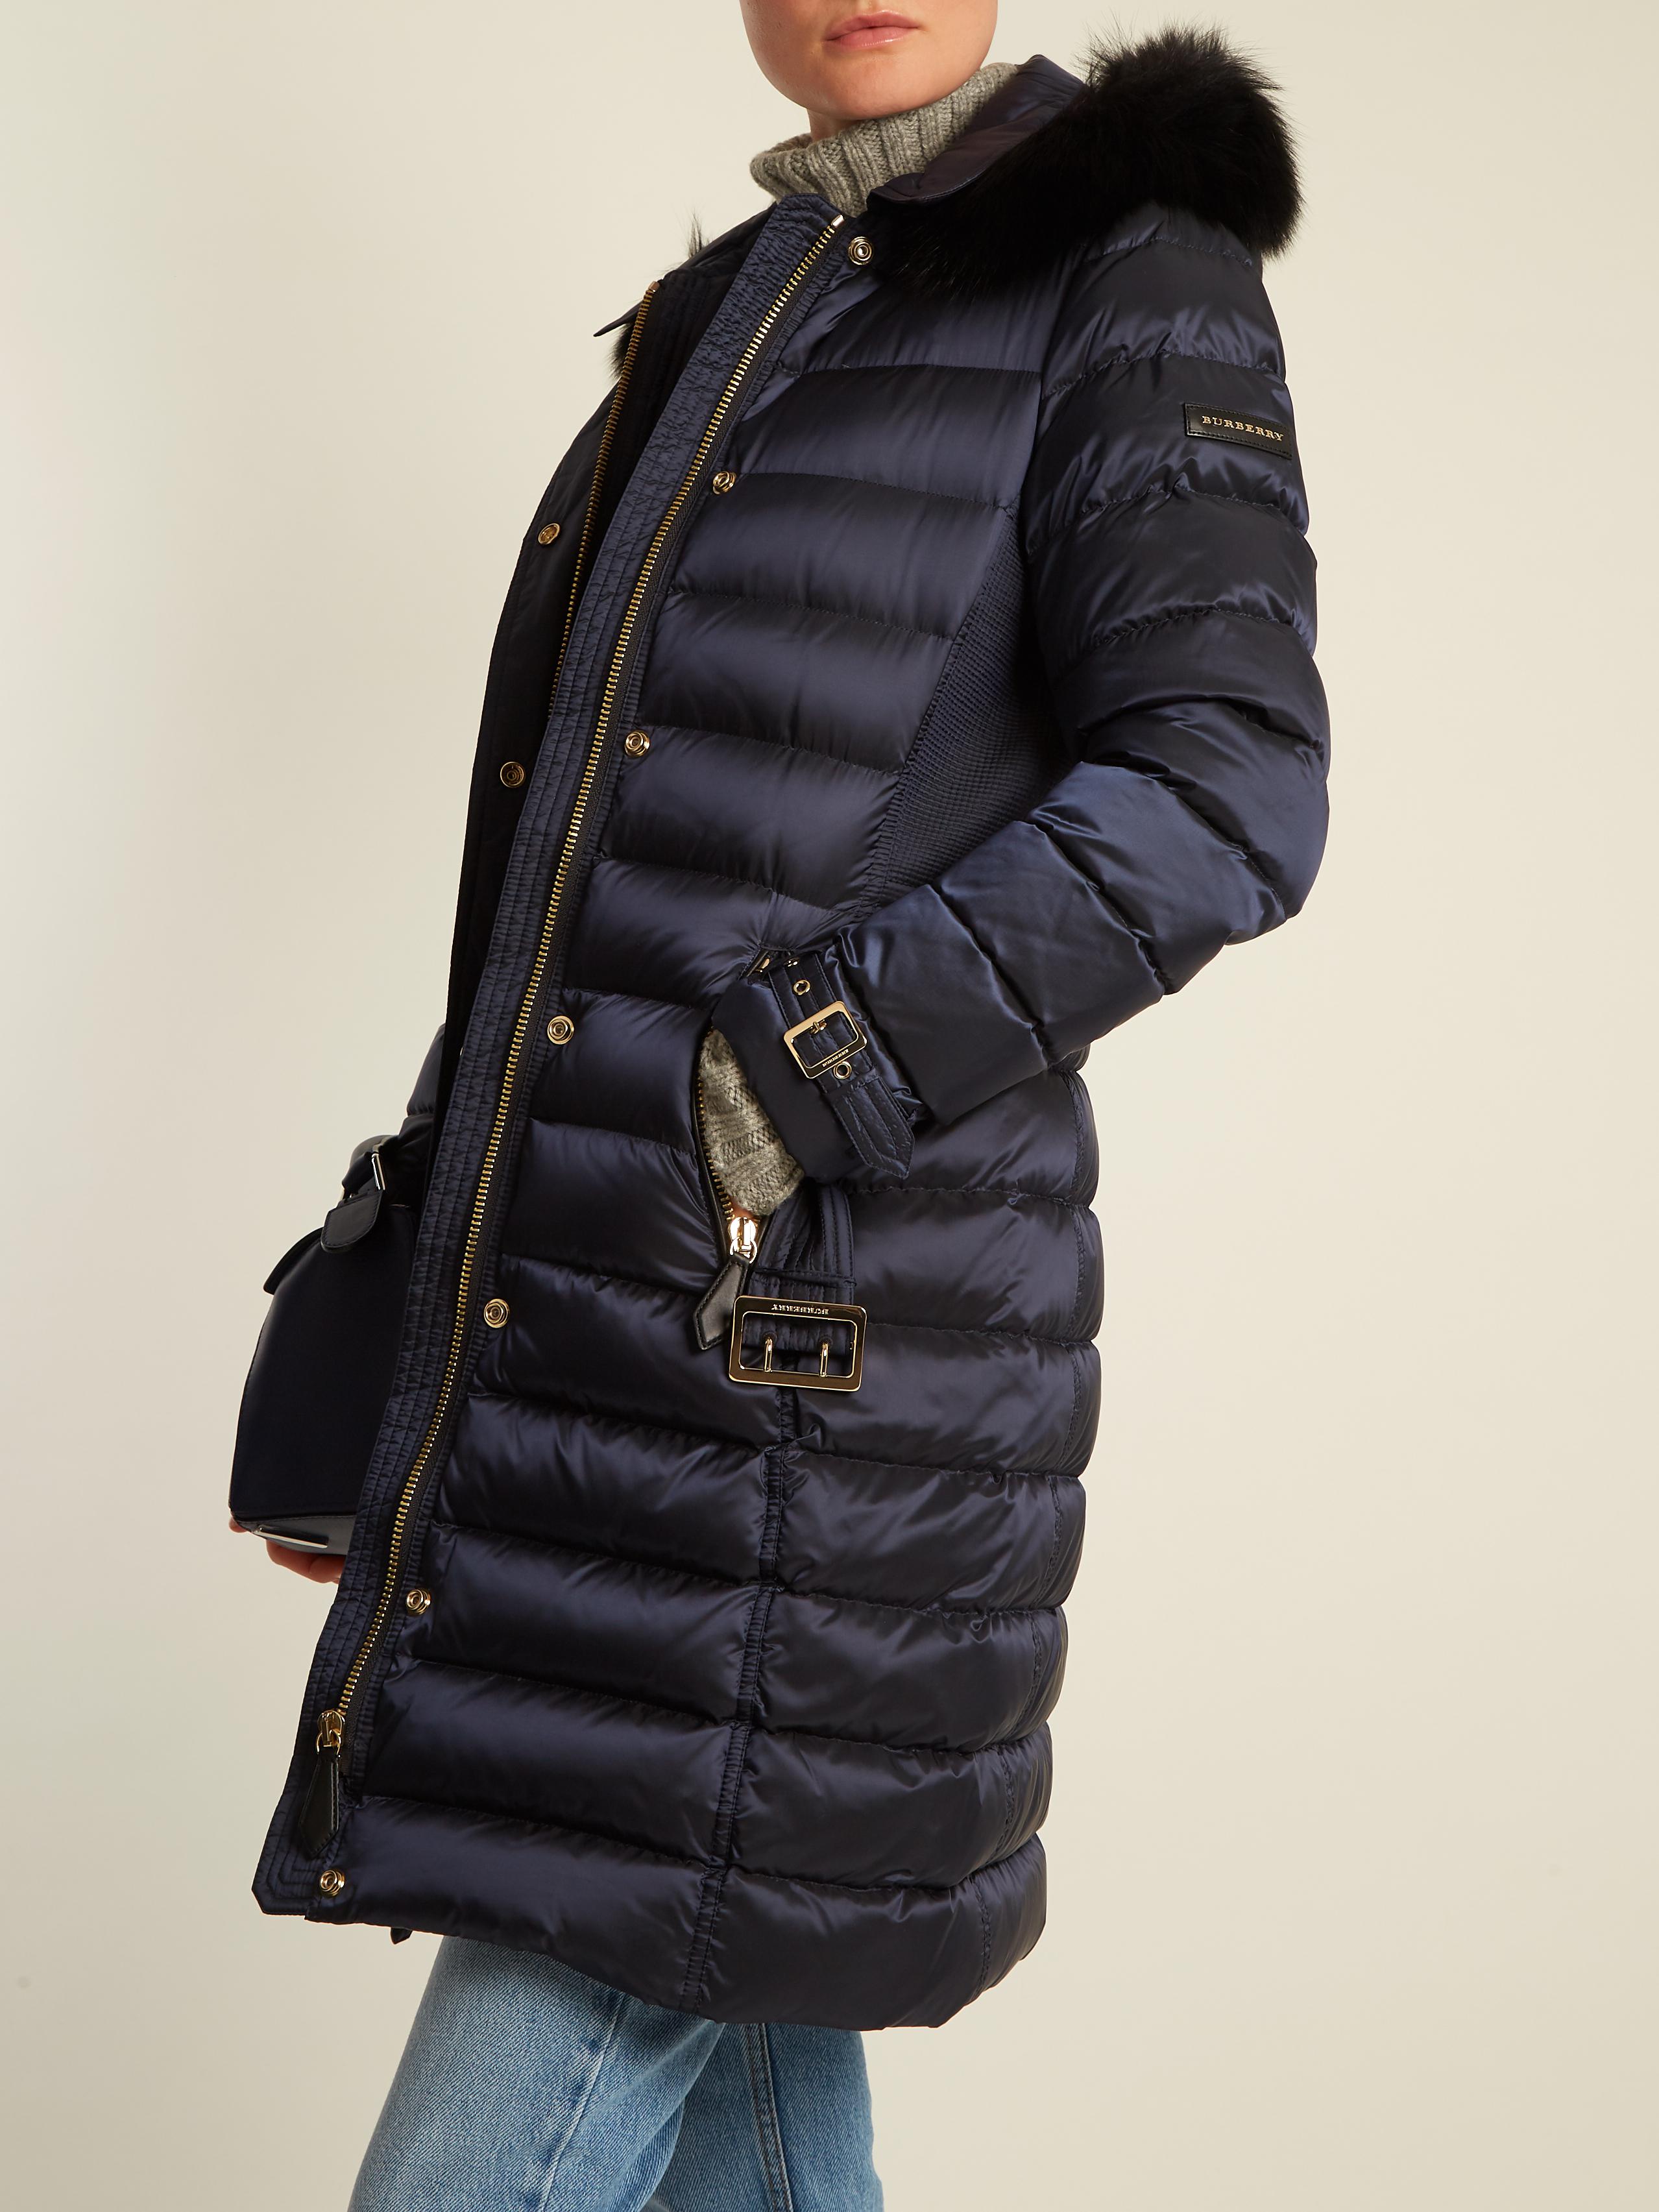 Burberry Ashmore Fur-trimmed Quilted Down Coat in Blue | Lyst